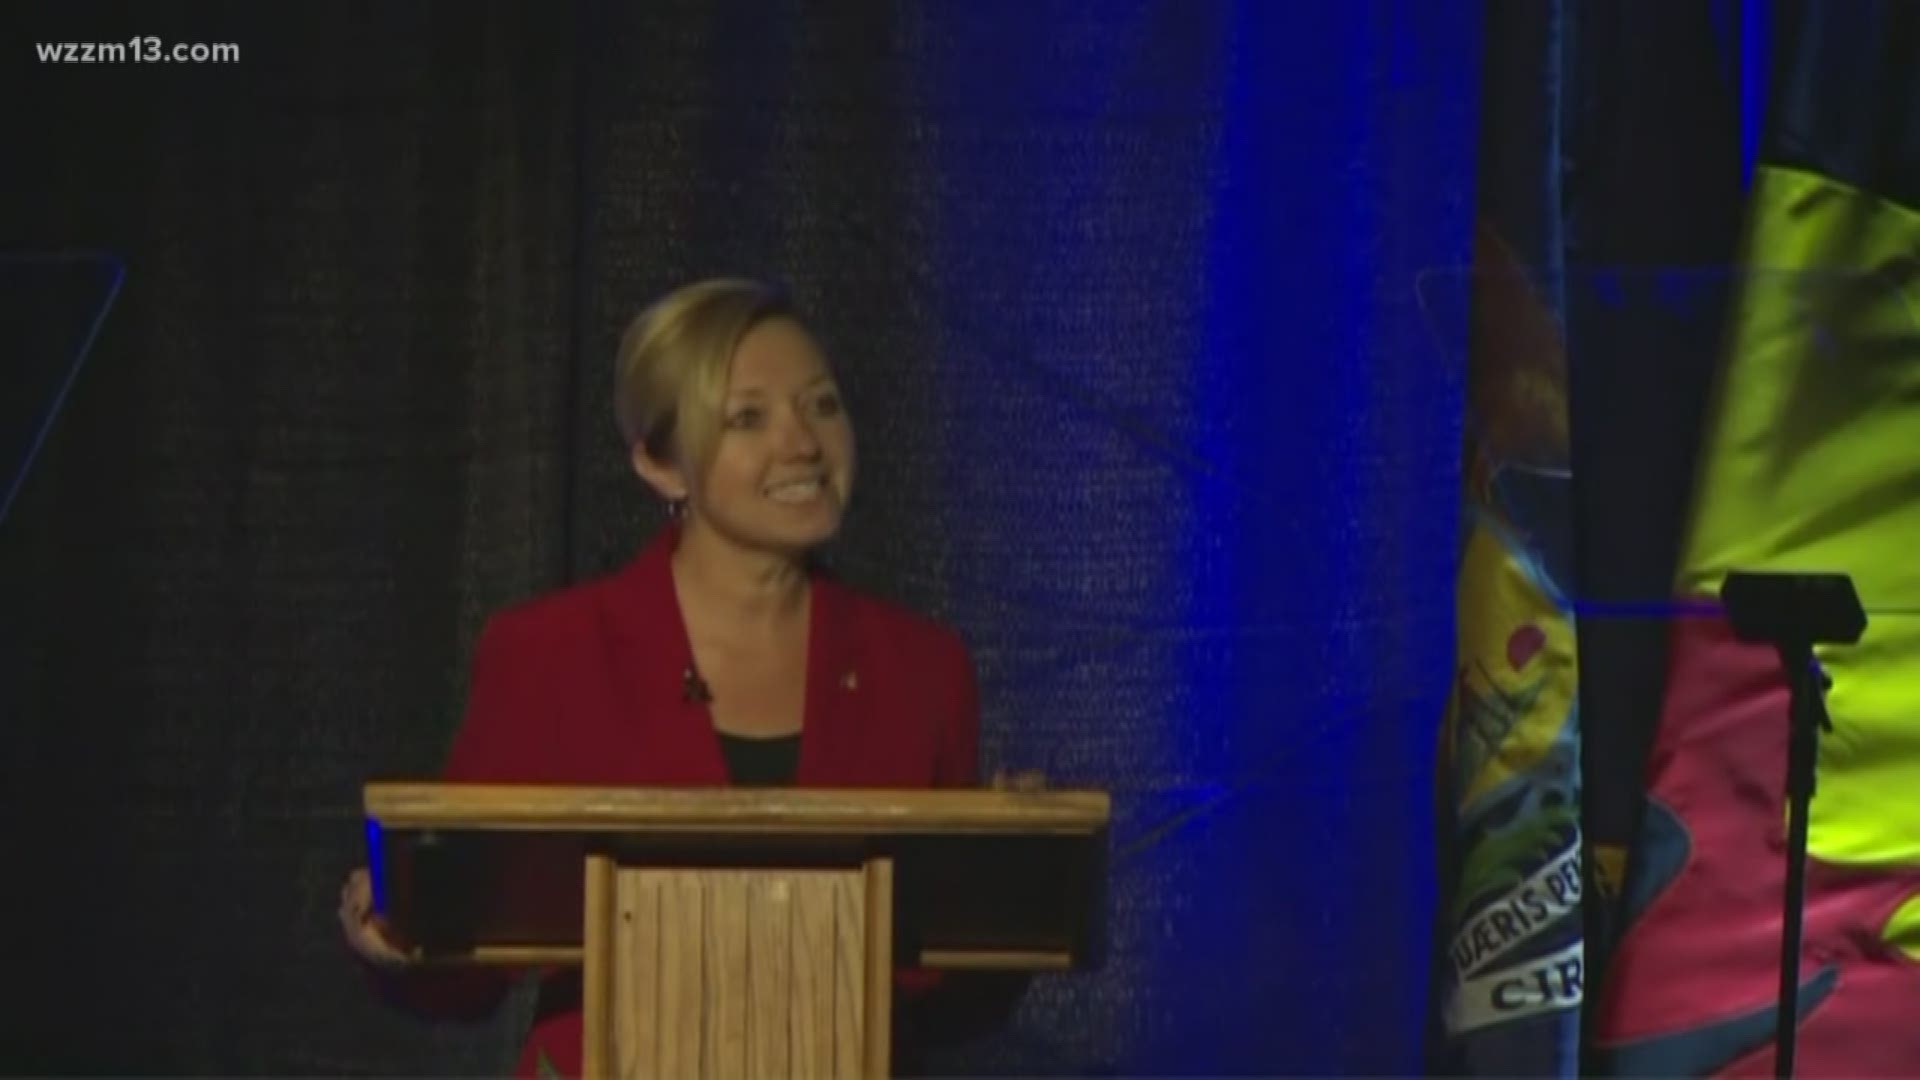 Grand Rapids Mayor talks affordable housing, education and the 2020 census at State of the City